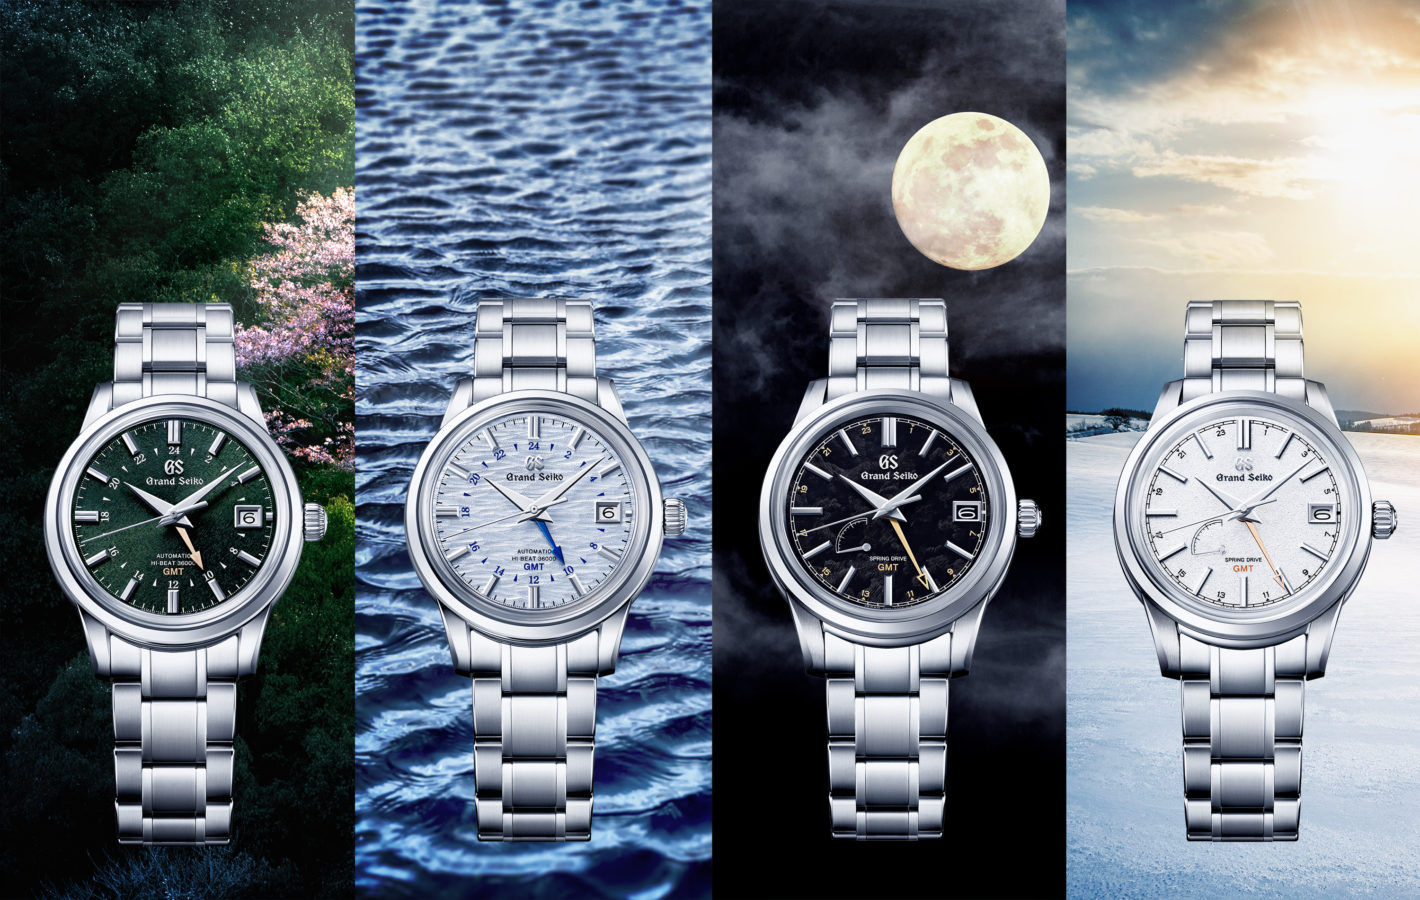 Discover the Beauty of Nature with Grand Seiko and Credor's Collections